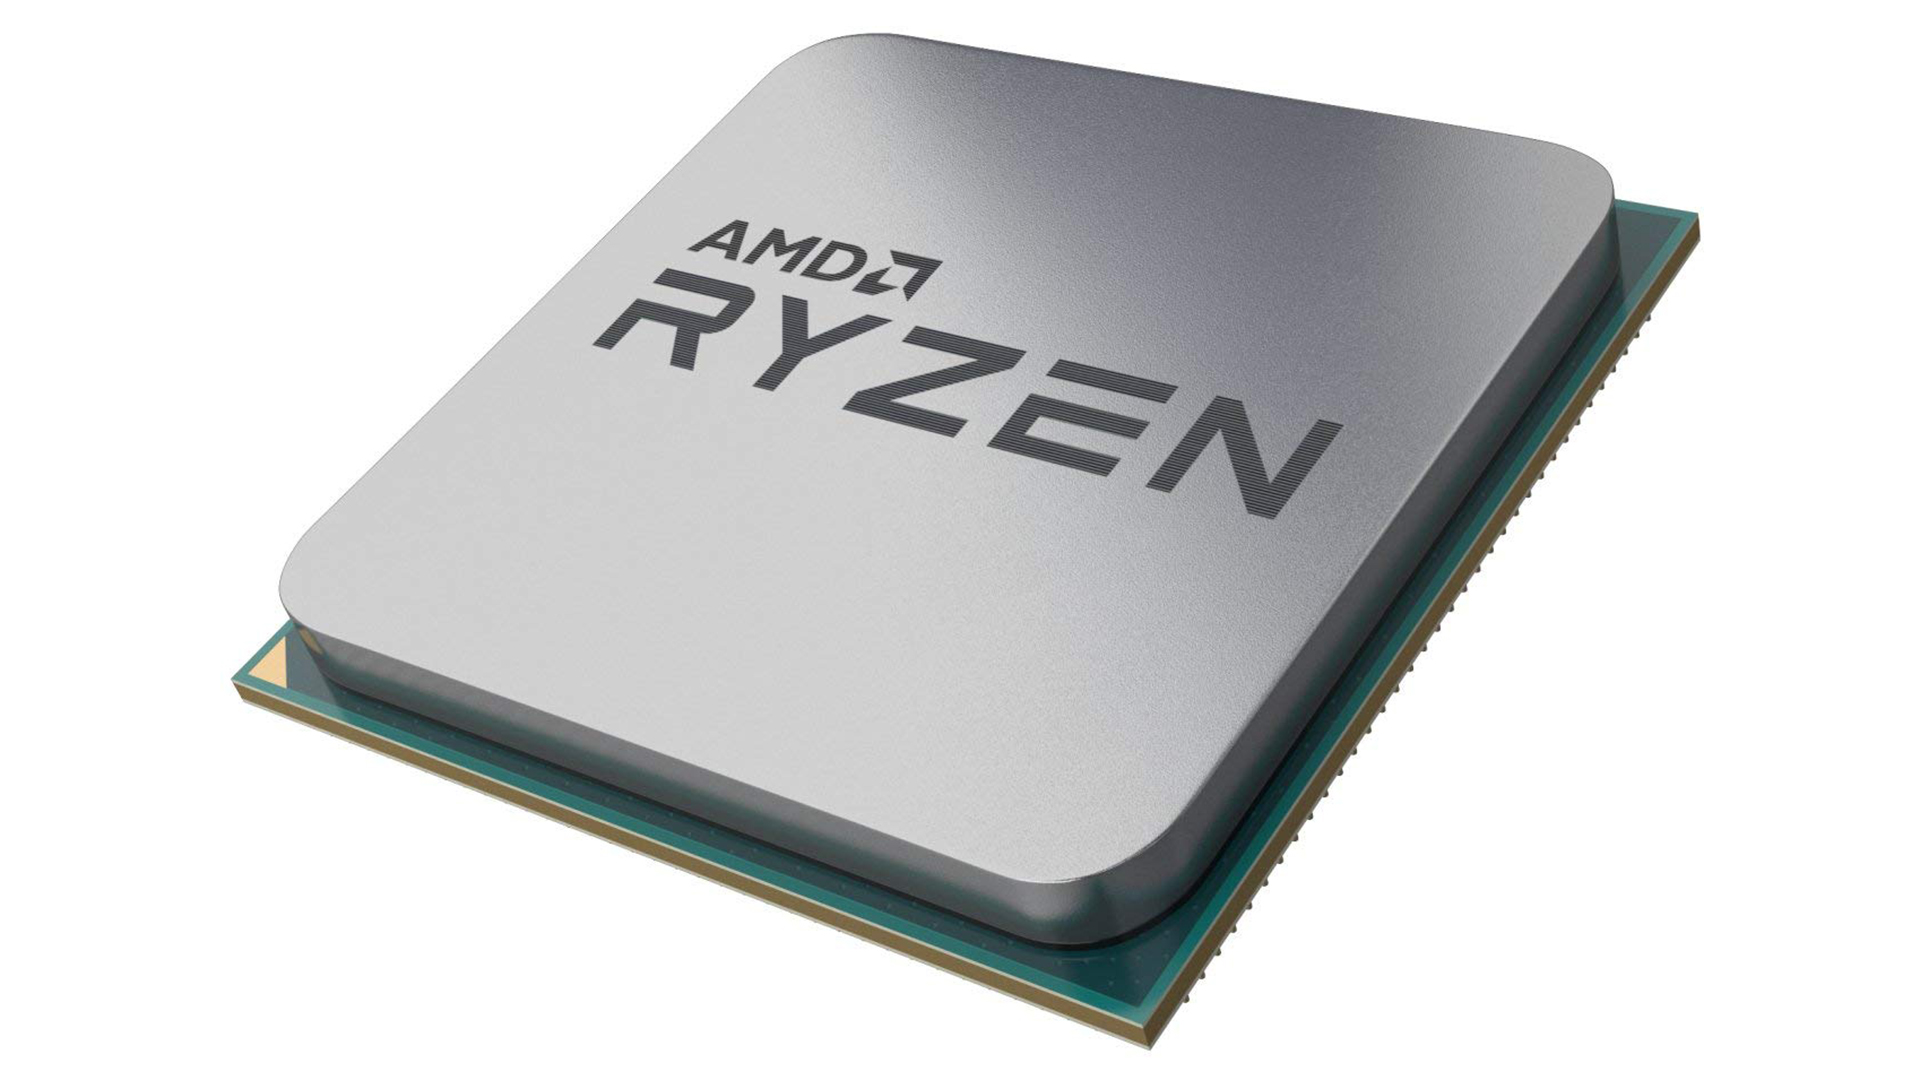 krokodil gebed Soepel At least some X570 motherboards will still support AMD Ryzen 5 1600 AF CPUs  | PCGamesN